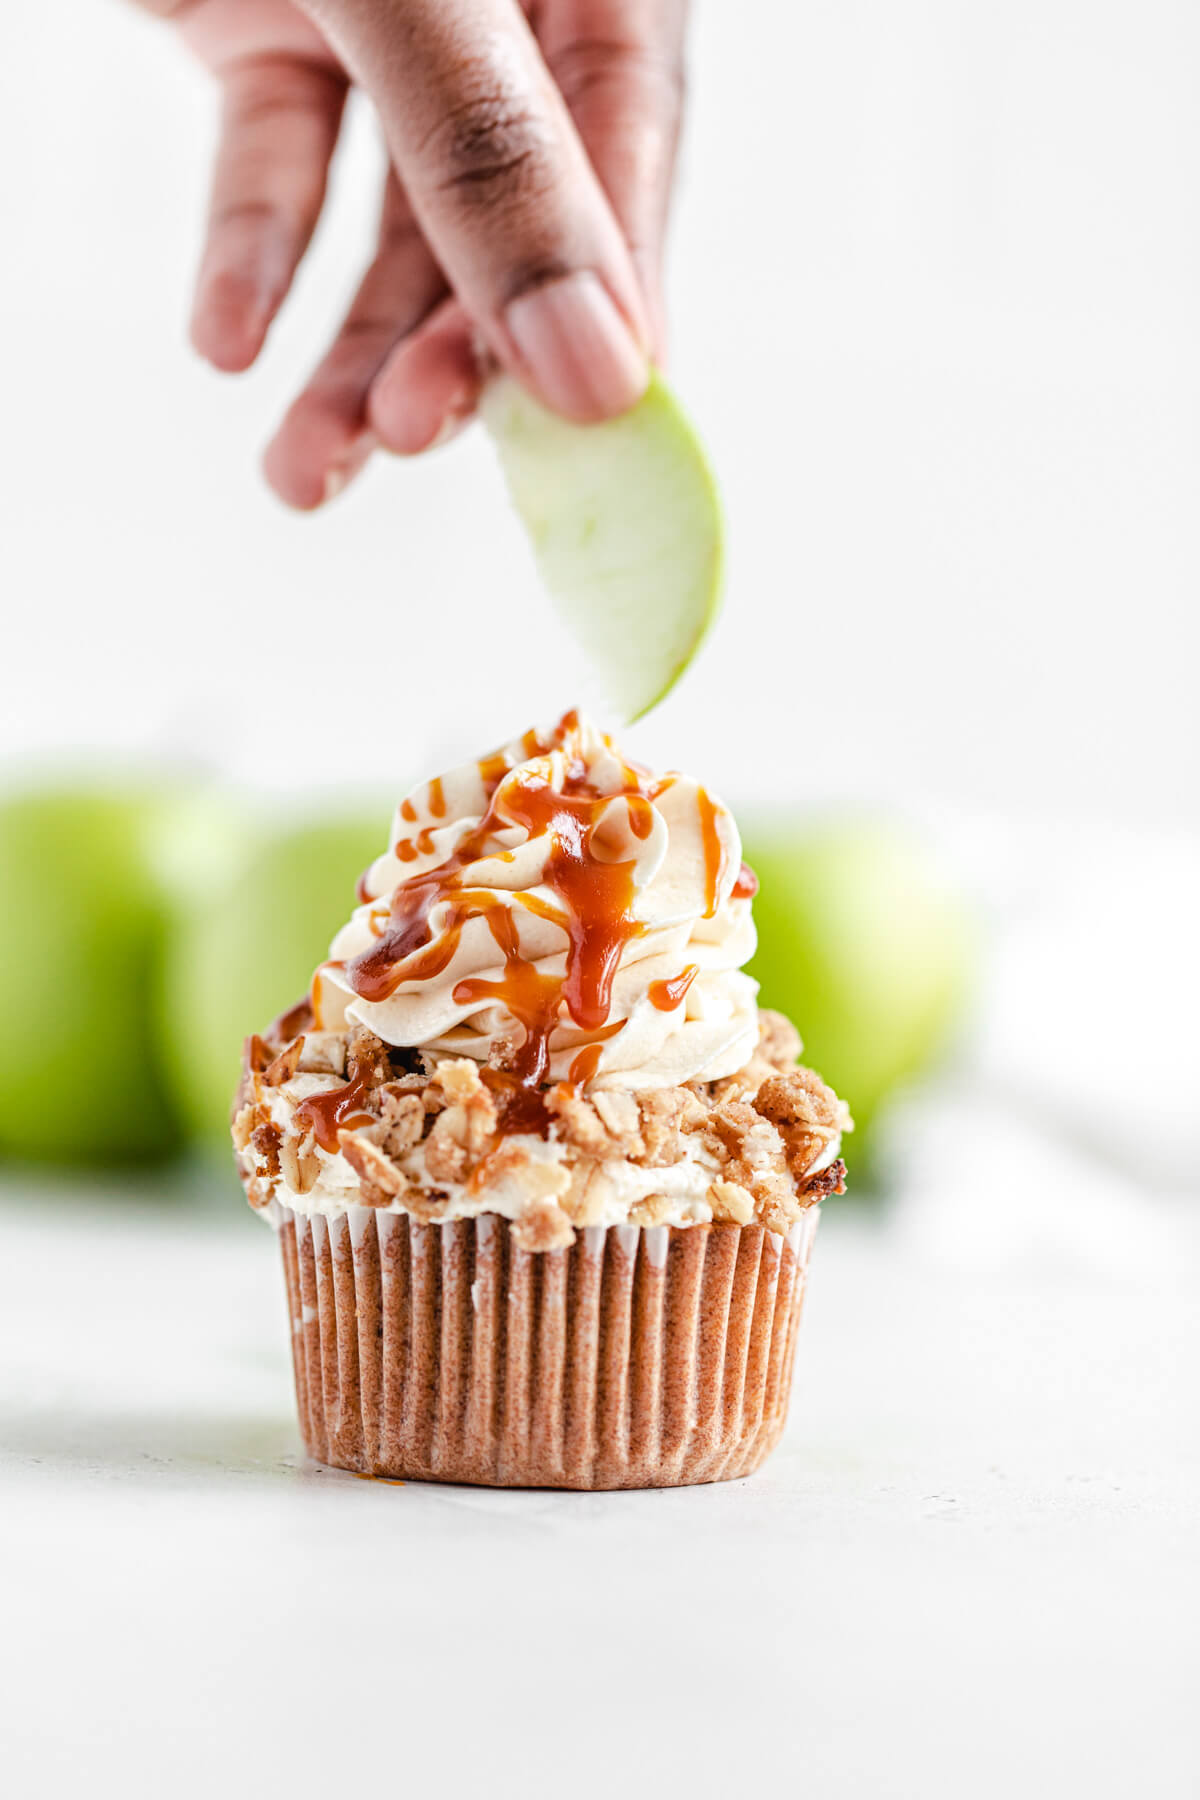 placing apple slice onto frosted cupcake